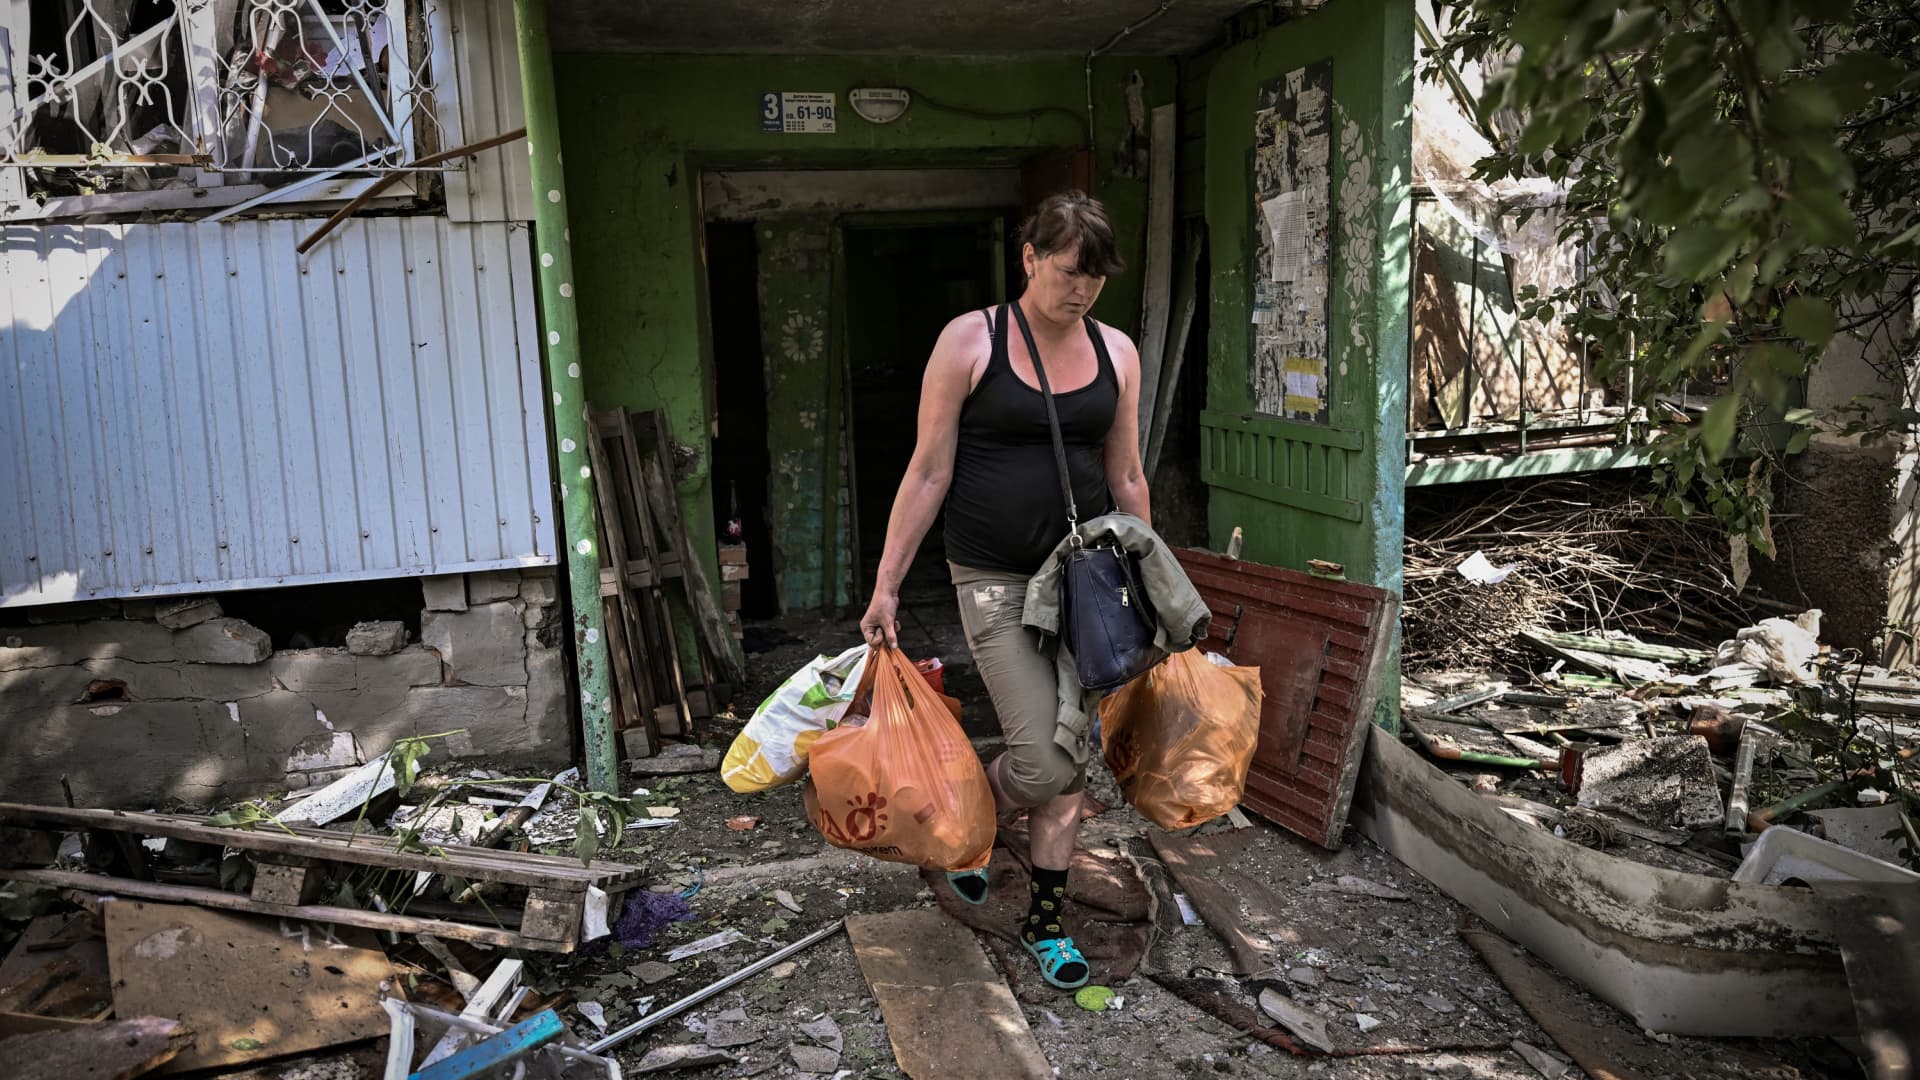 A woman walks out of a damaged appartment building after a strike in the city of Slovyansk at the eastern Ukrainian region of Donbas on May 31, 2022, amid Russian invasion of Ukraine.